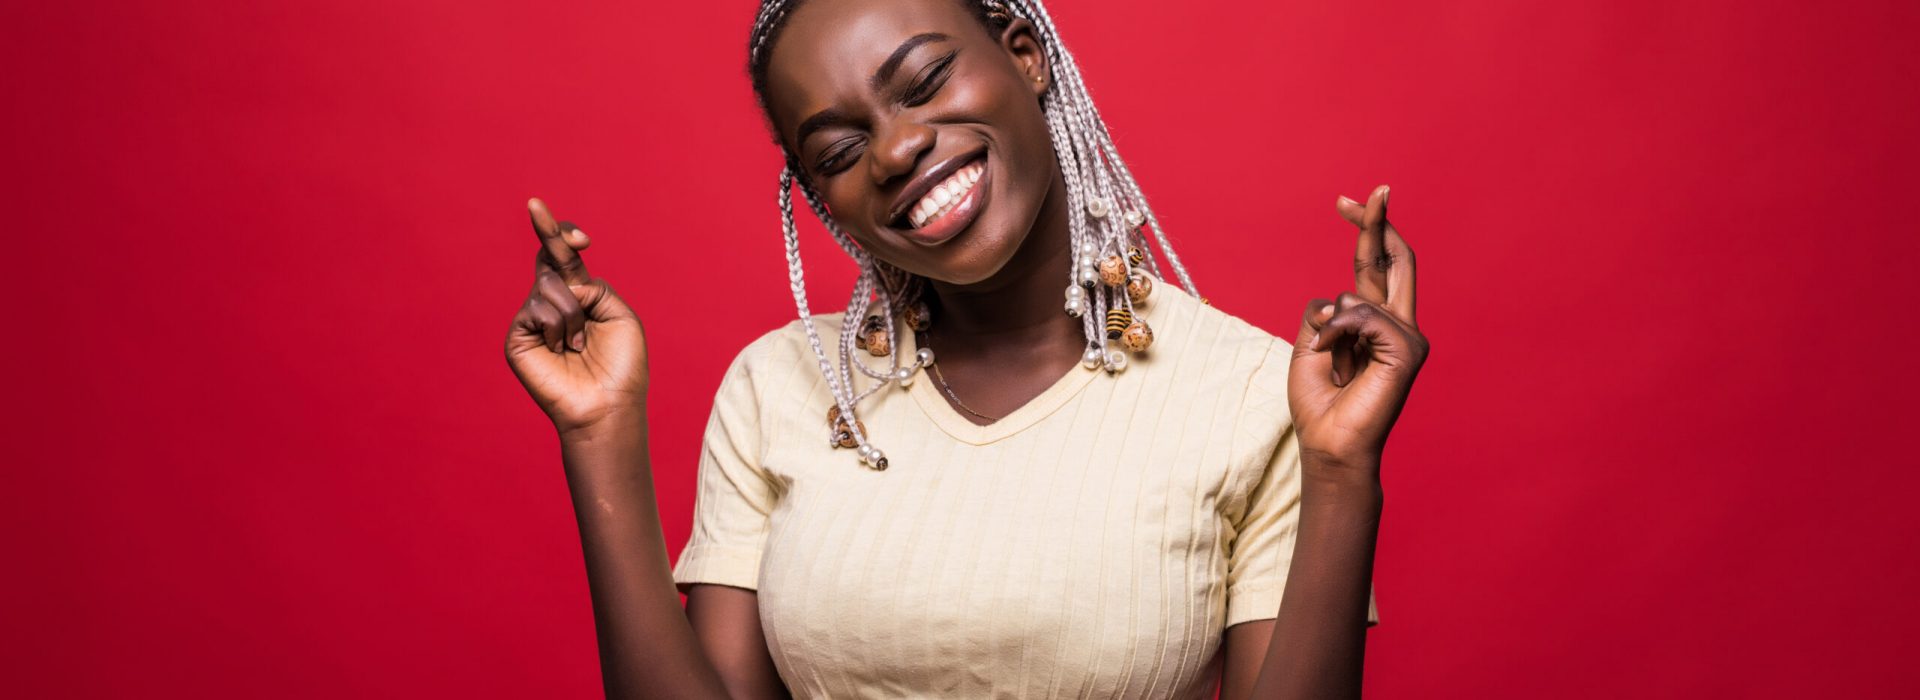 Beautiful young Afro American woman is holding fingers crossed and smiling, isolated on red background